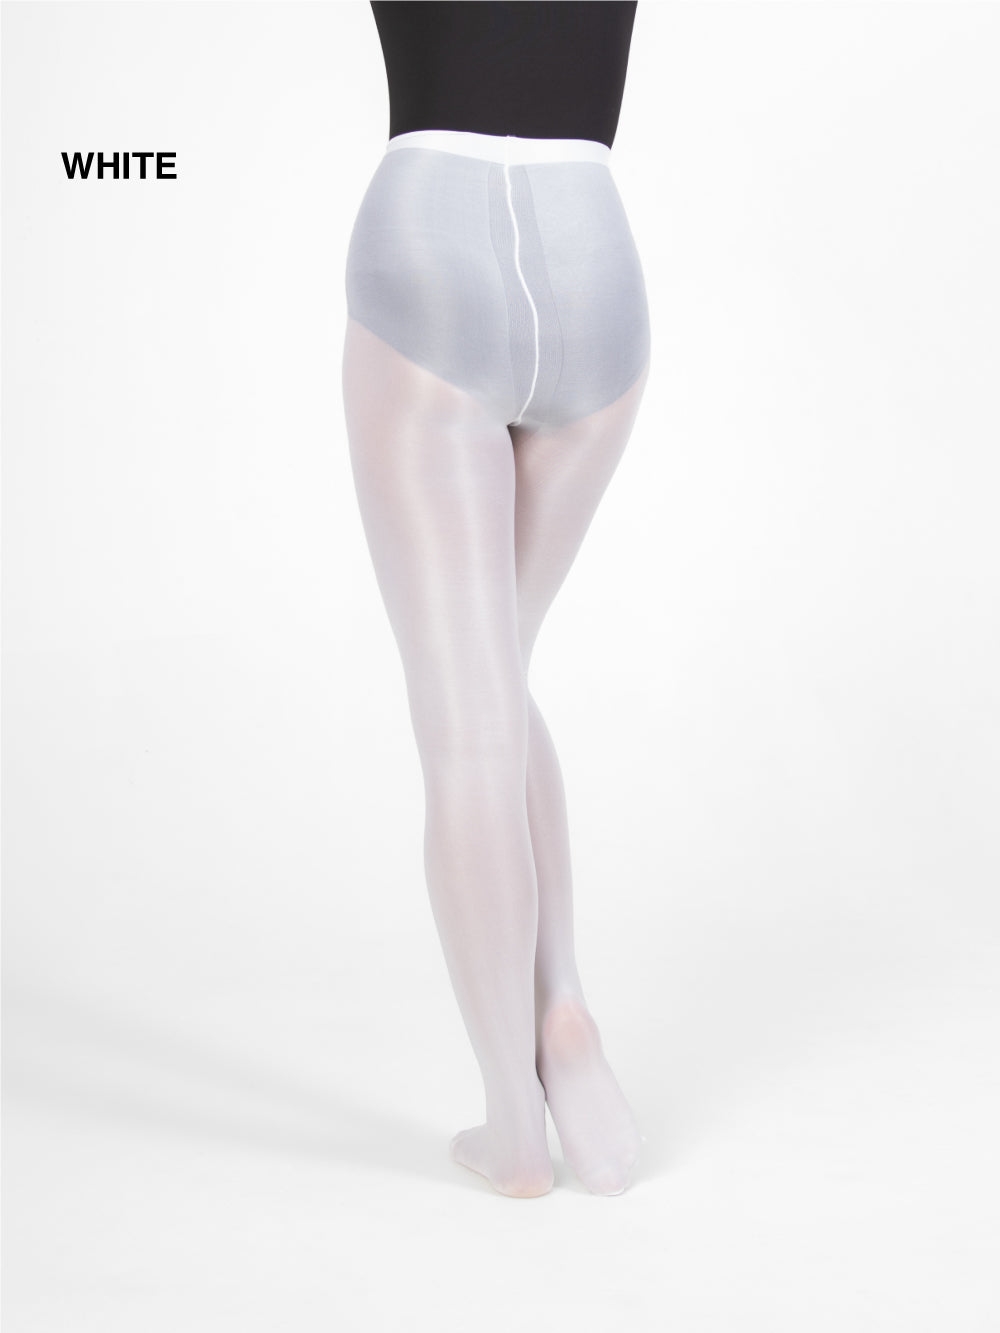 Children's Ultra Shimmery Dance Tights by Body Wrappers